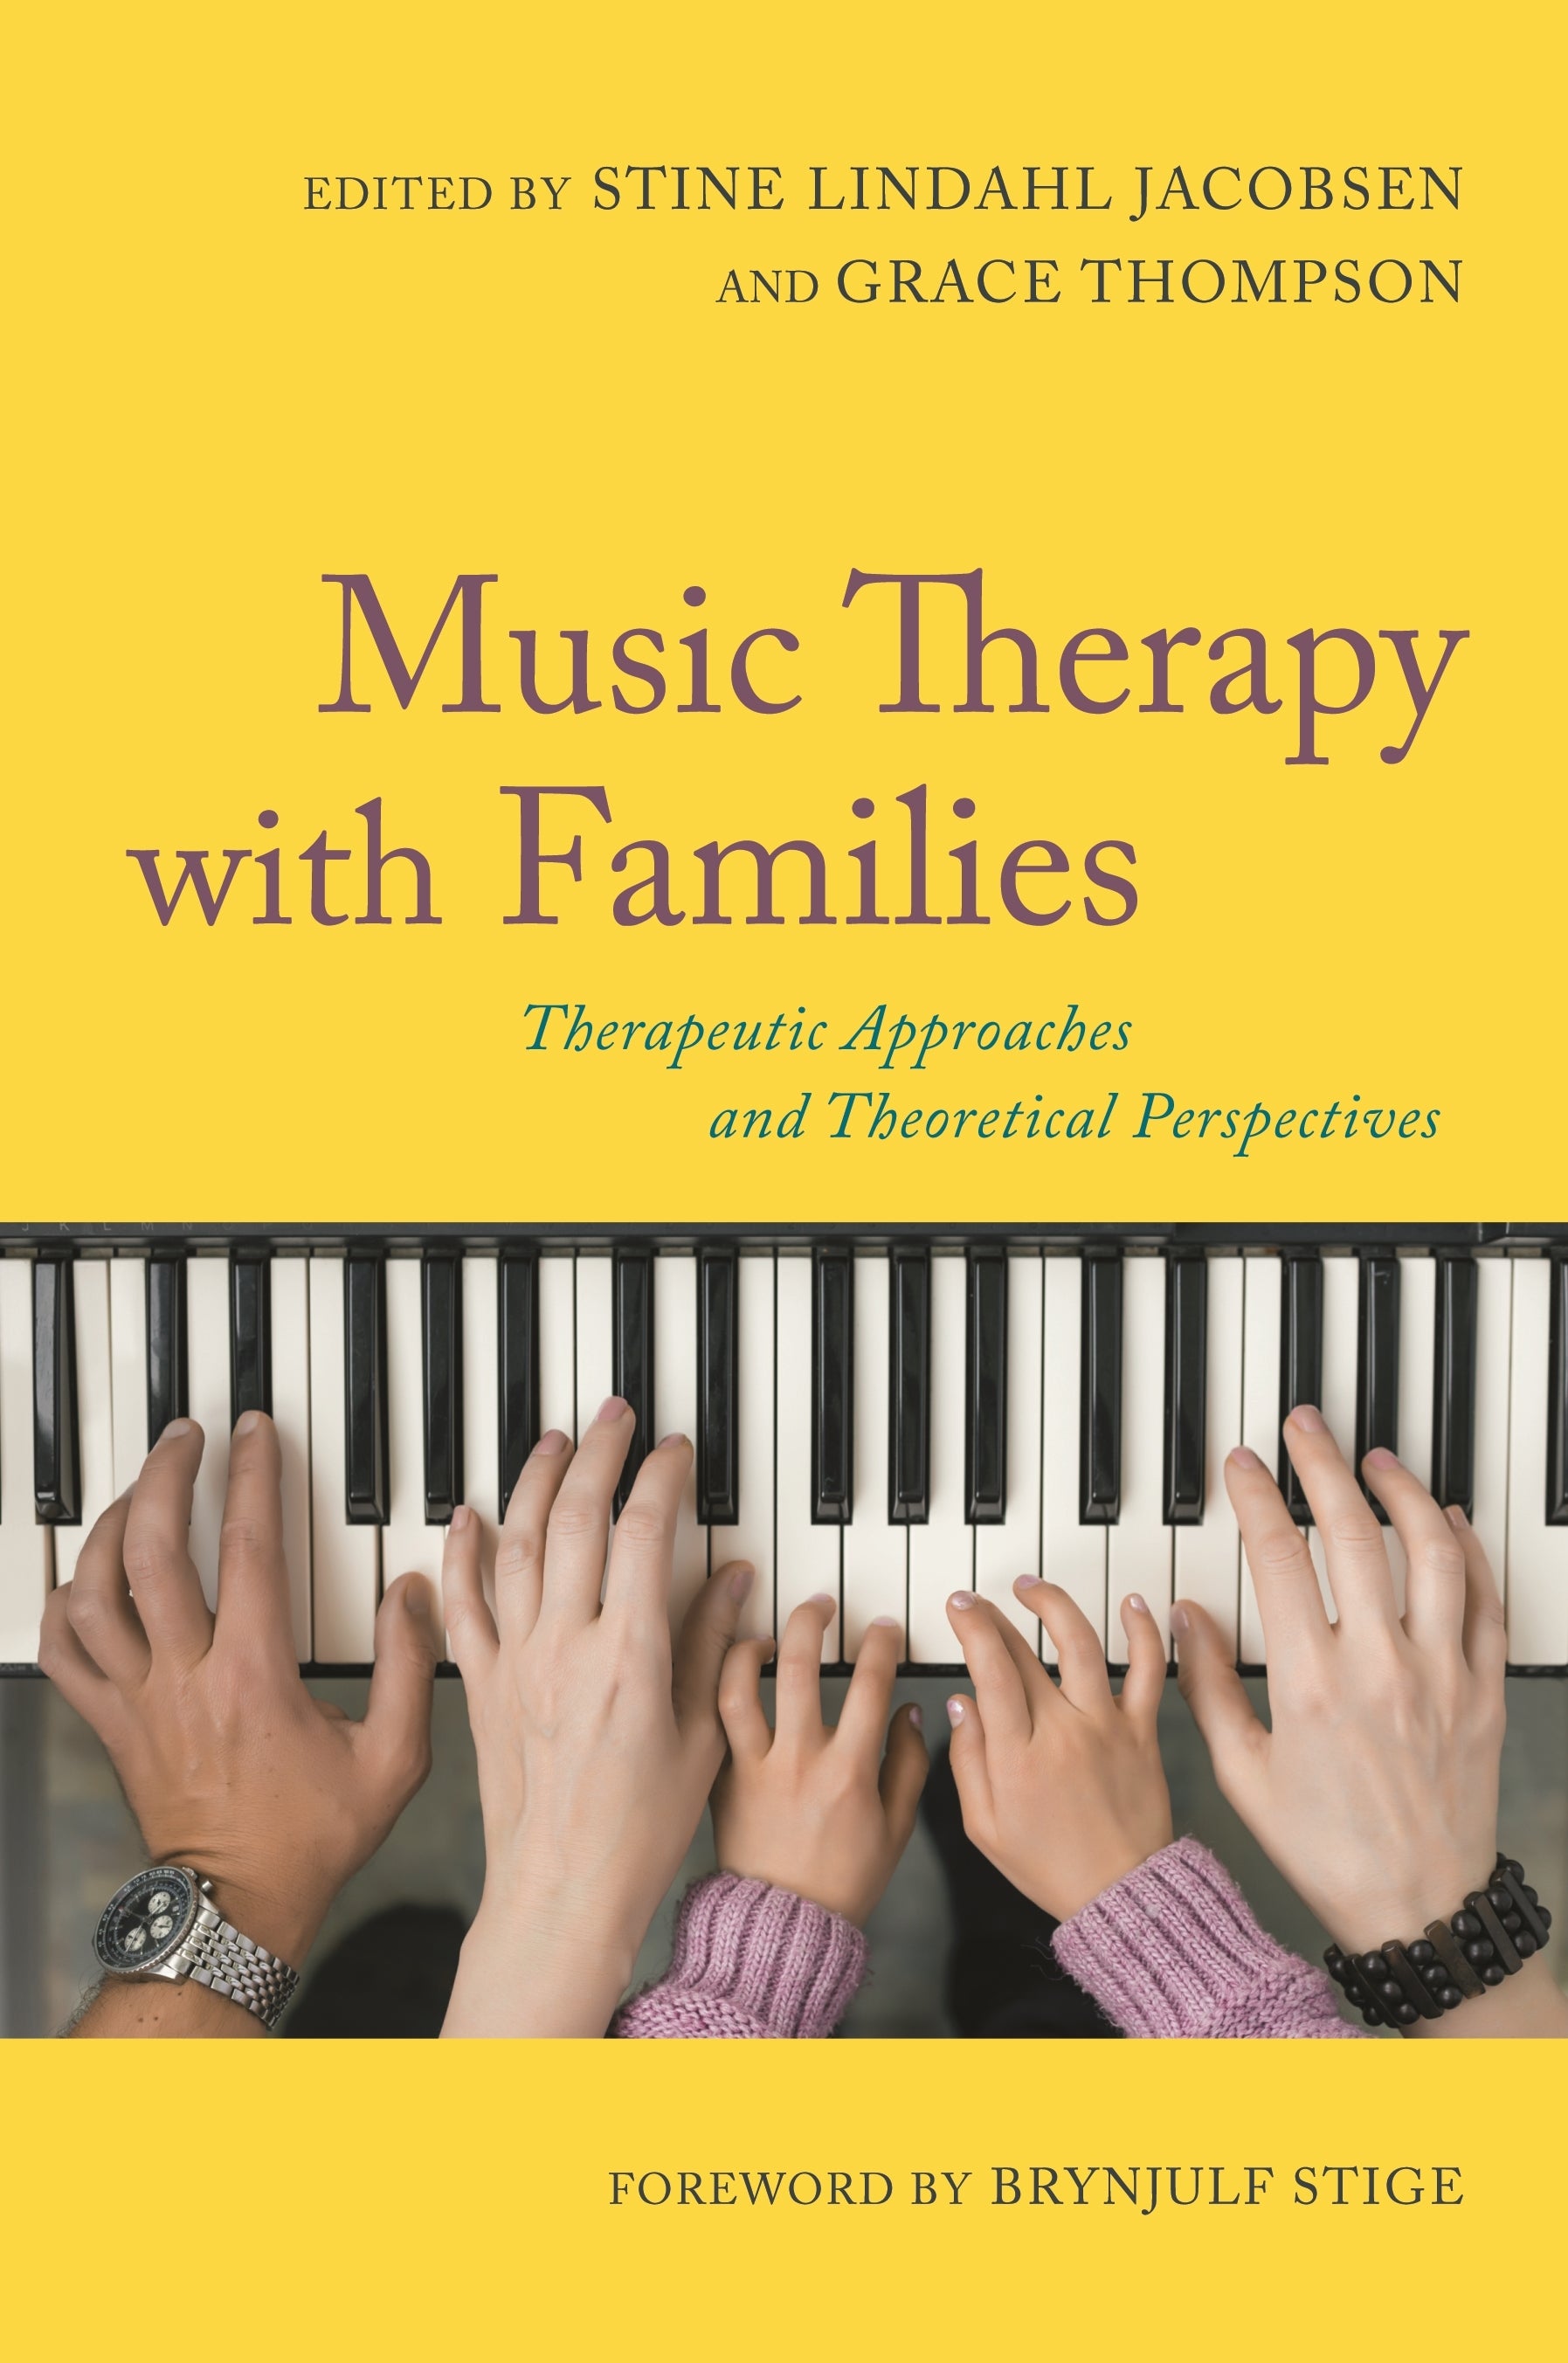 Music Therapy with Families by Brynjulf Stige, Stine Lindahl Jacobsen, Grace Thompson, No Author Listed